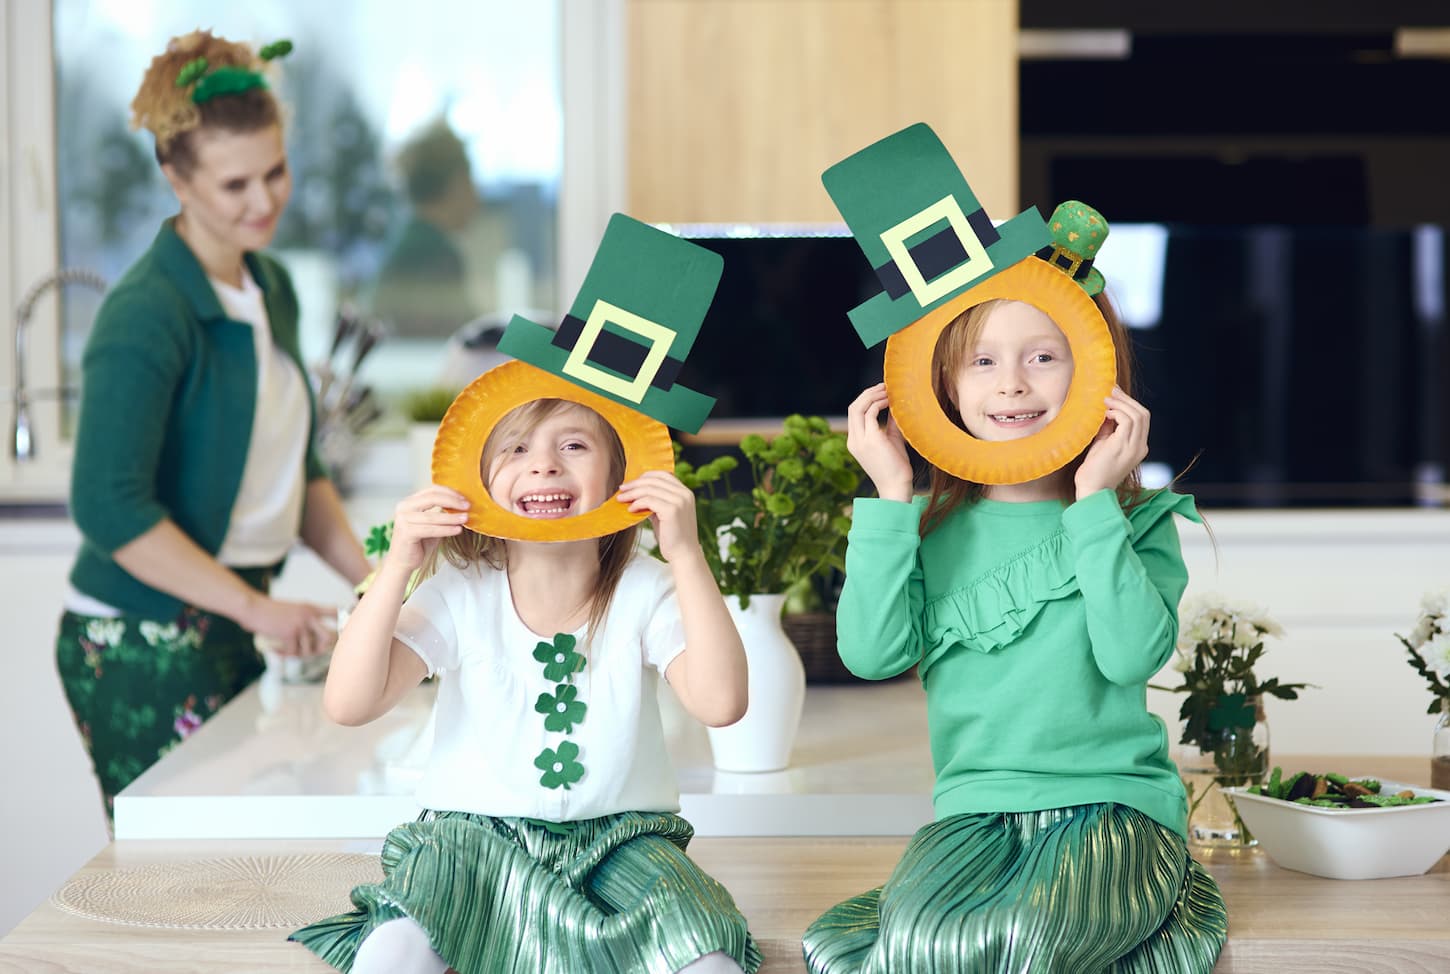 An image of two children dressed as Irish.